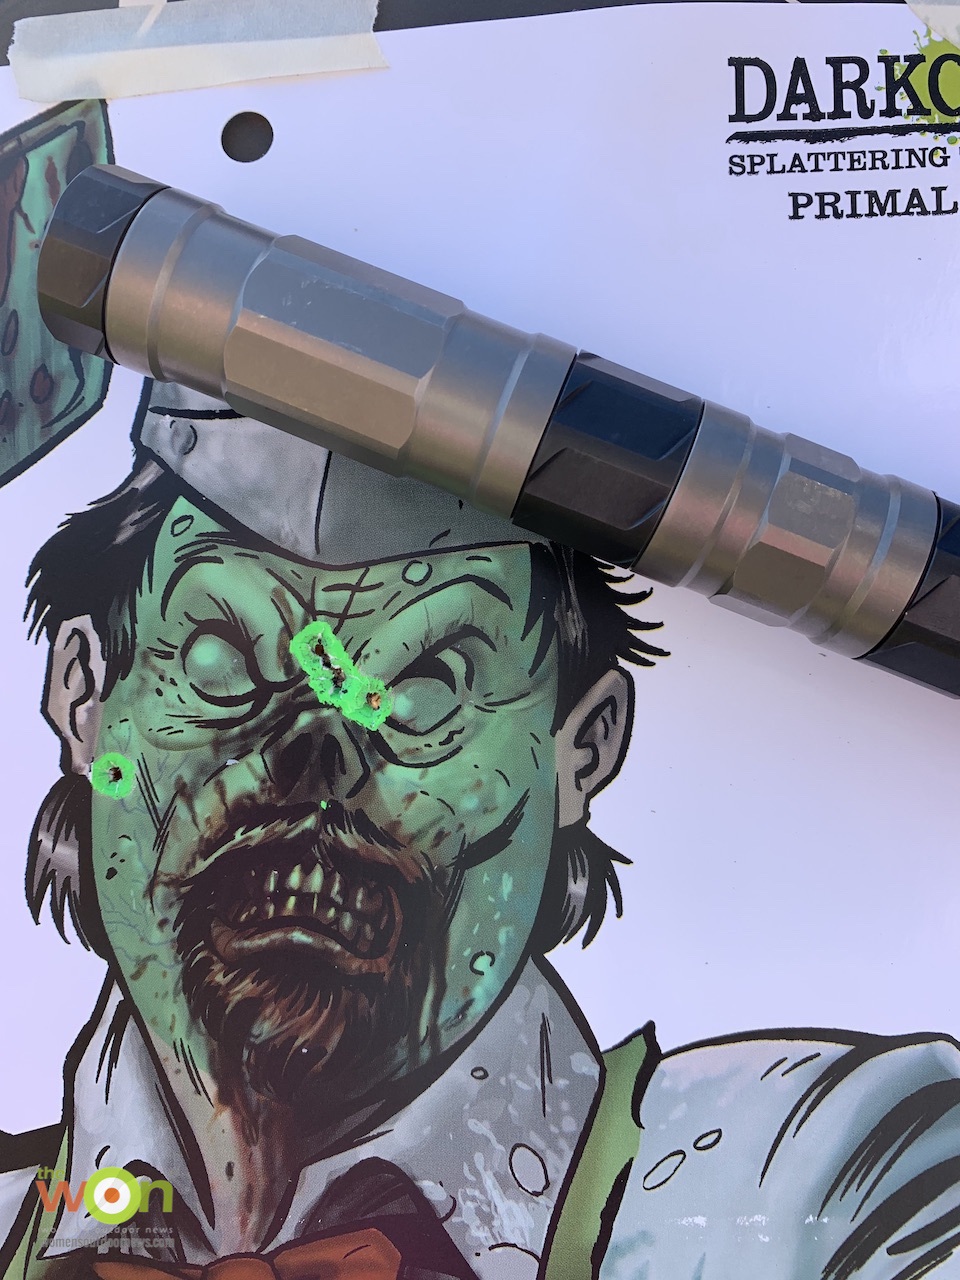 Plinking zombie target with switchback suppressor